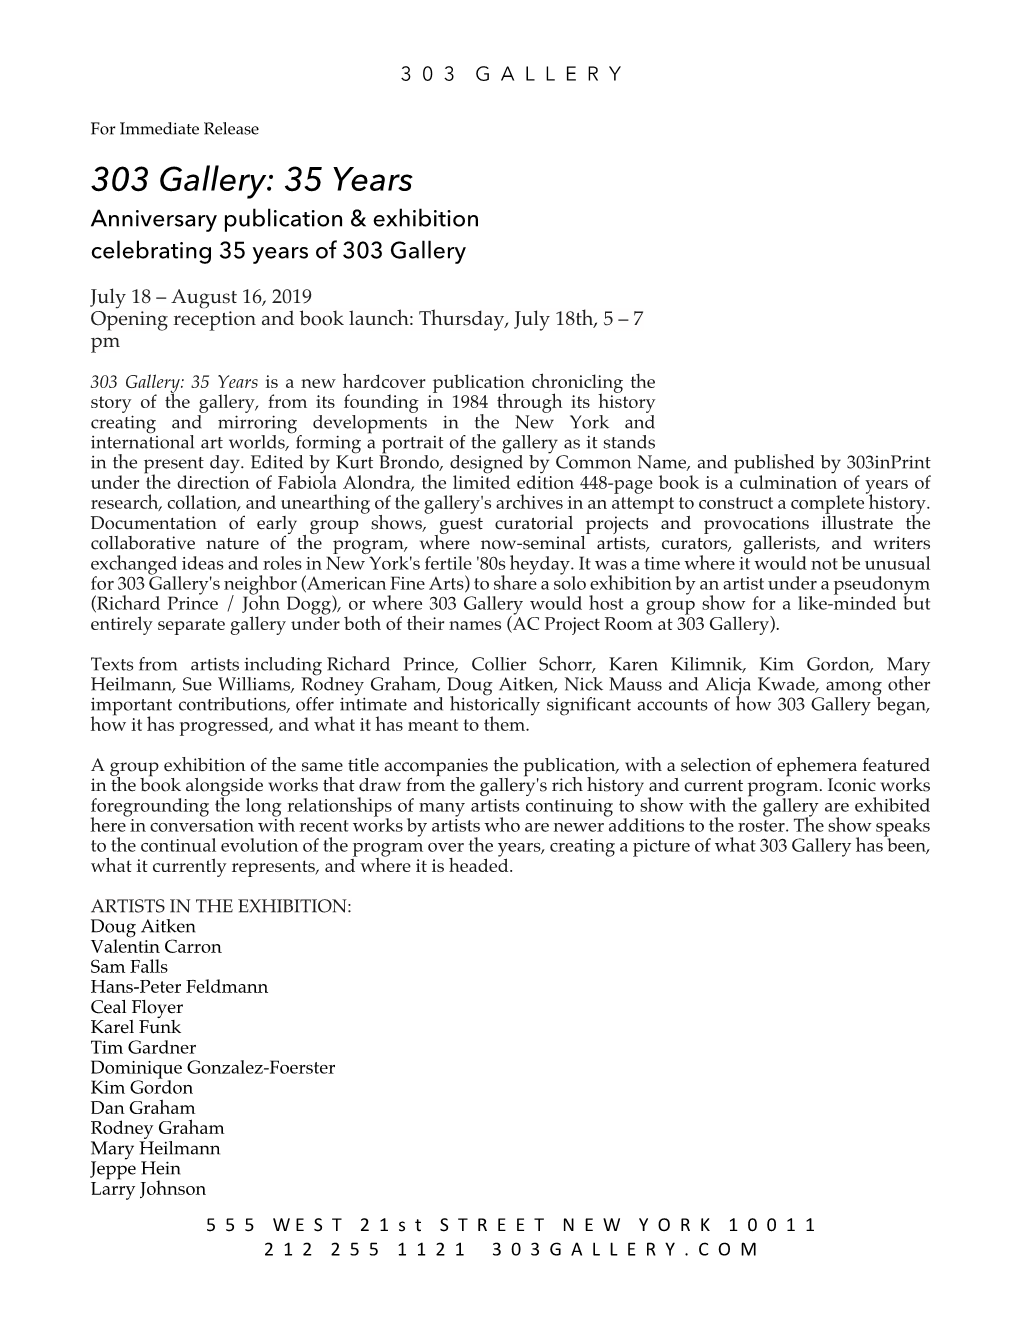 303 Gallery: 35 Years Anniversary Publication & Exhibition Celebrating 35 Years of 303 Gallery